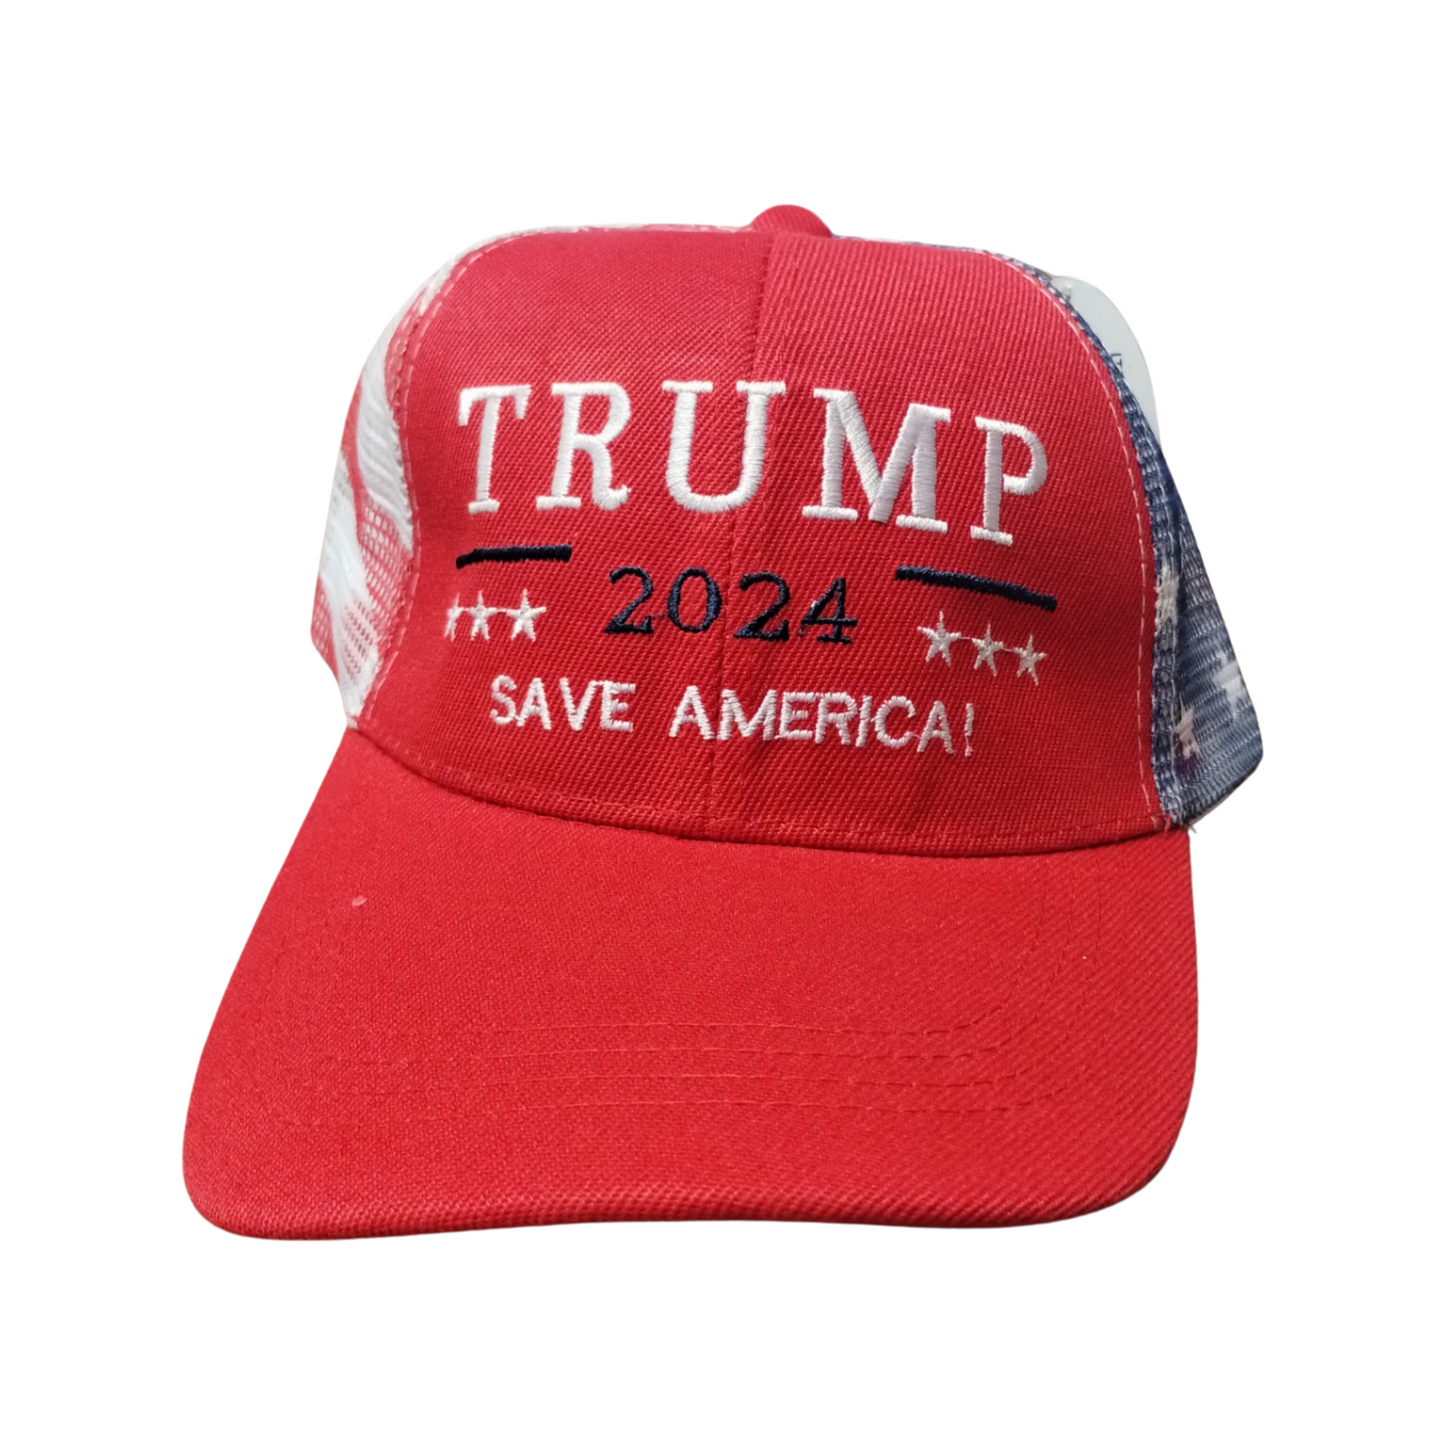 "Trump 2024 Save America Baseball Cap - Support for the 45th President"